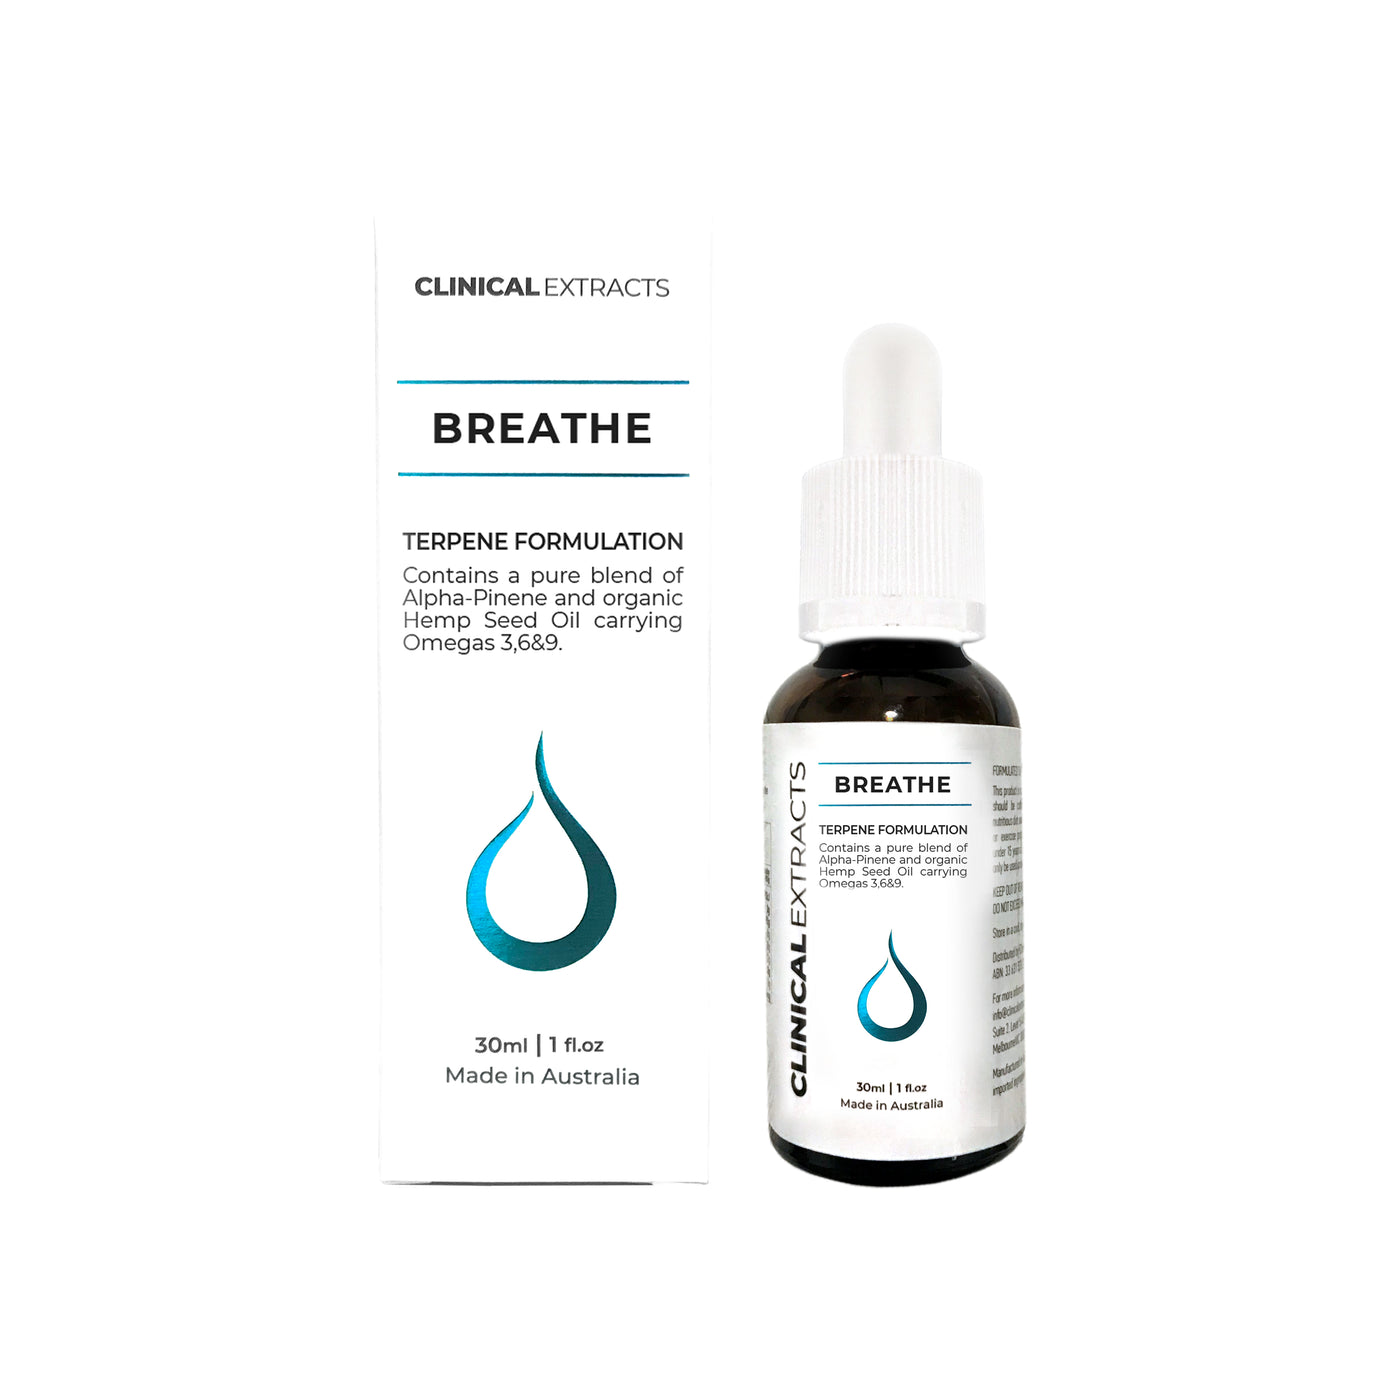 Clinical Extracts Breathe 30mL